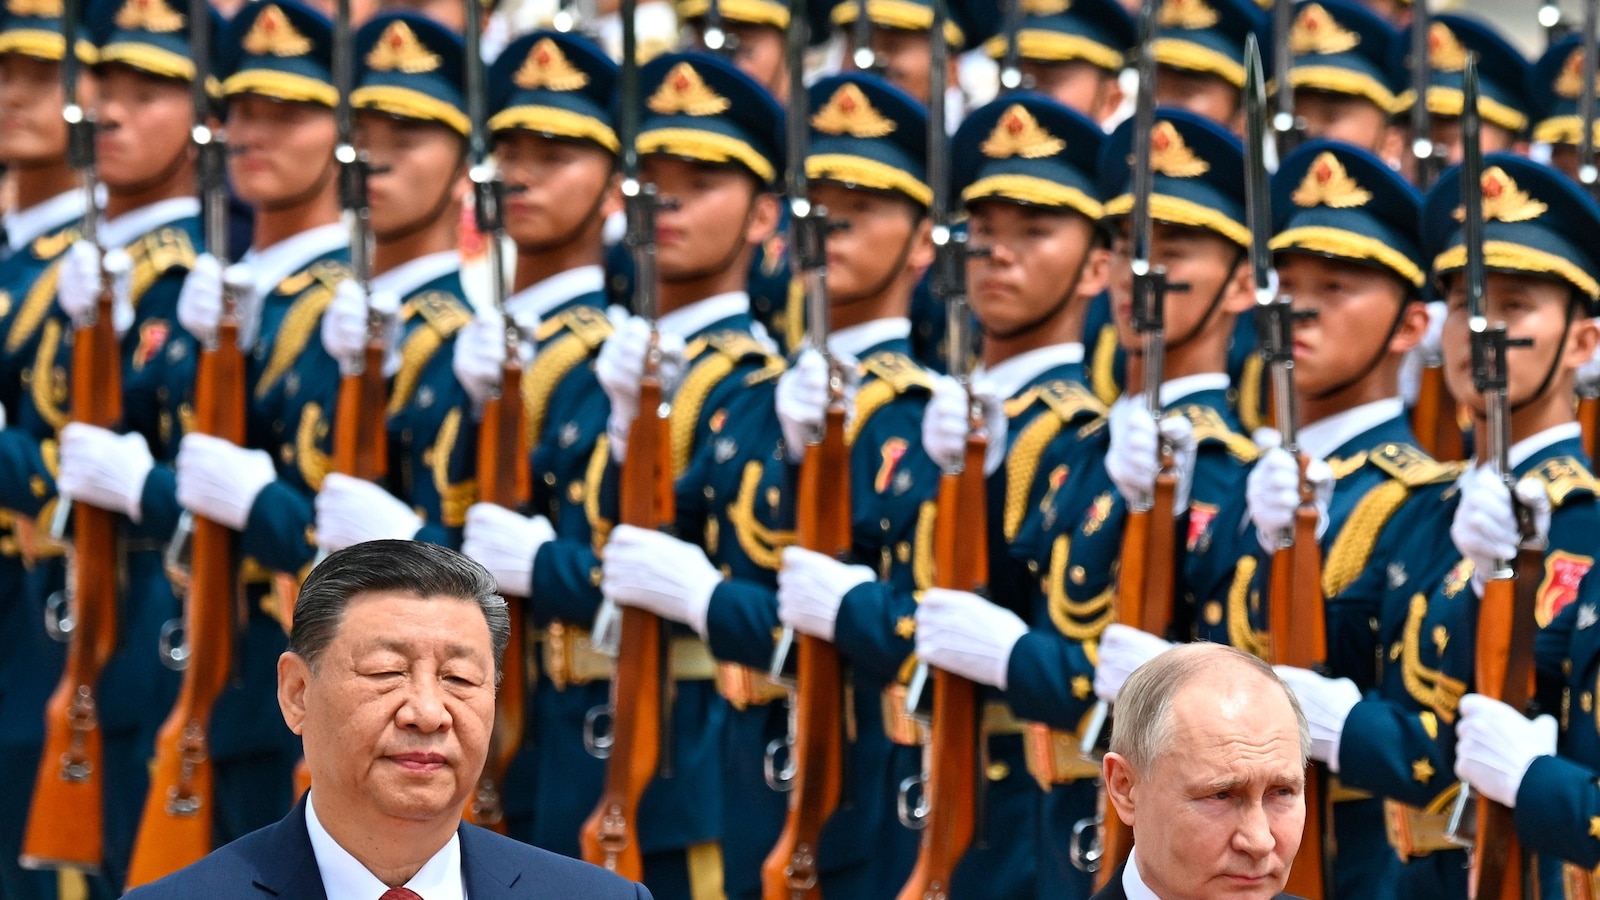 China and Russia are reaffirming their close ties as Moscow continues its offensive in Ukraine